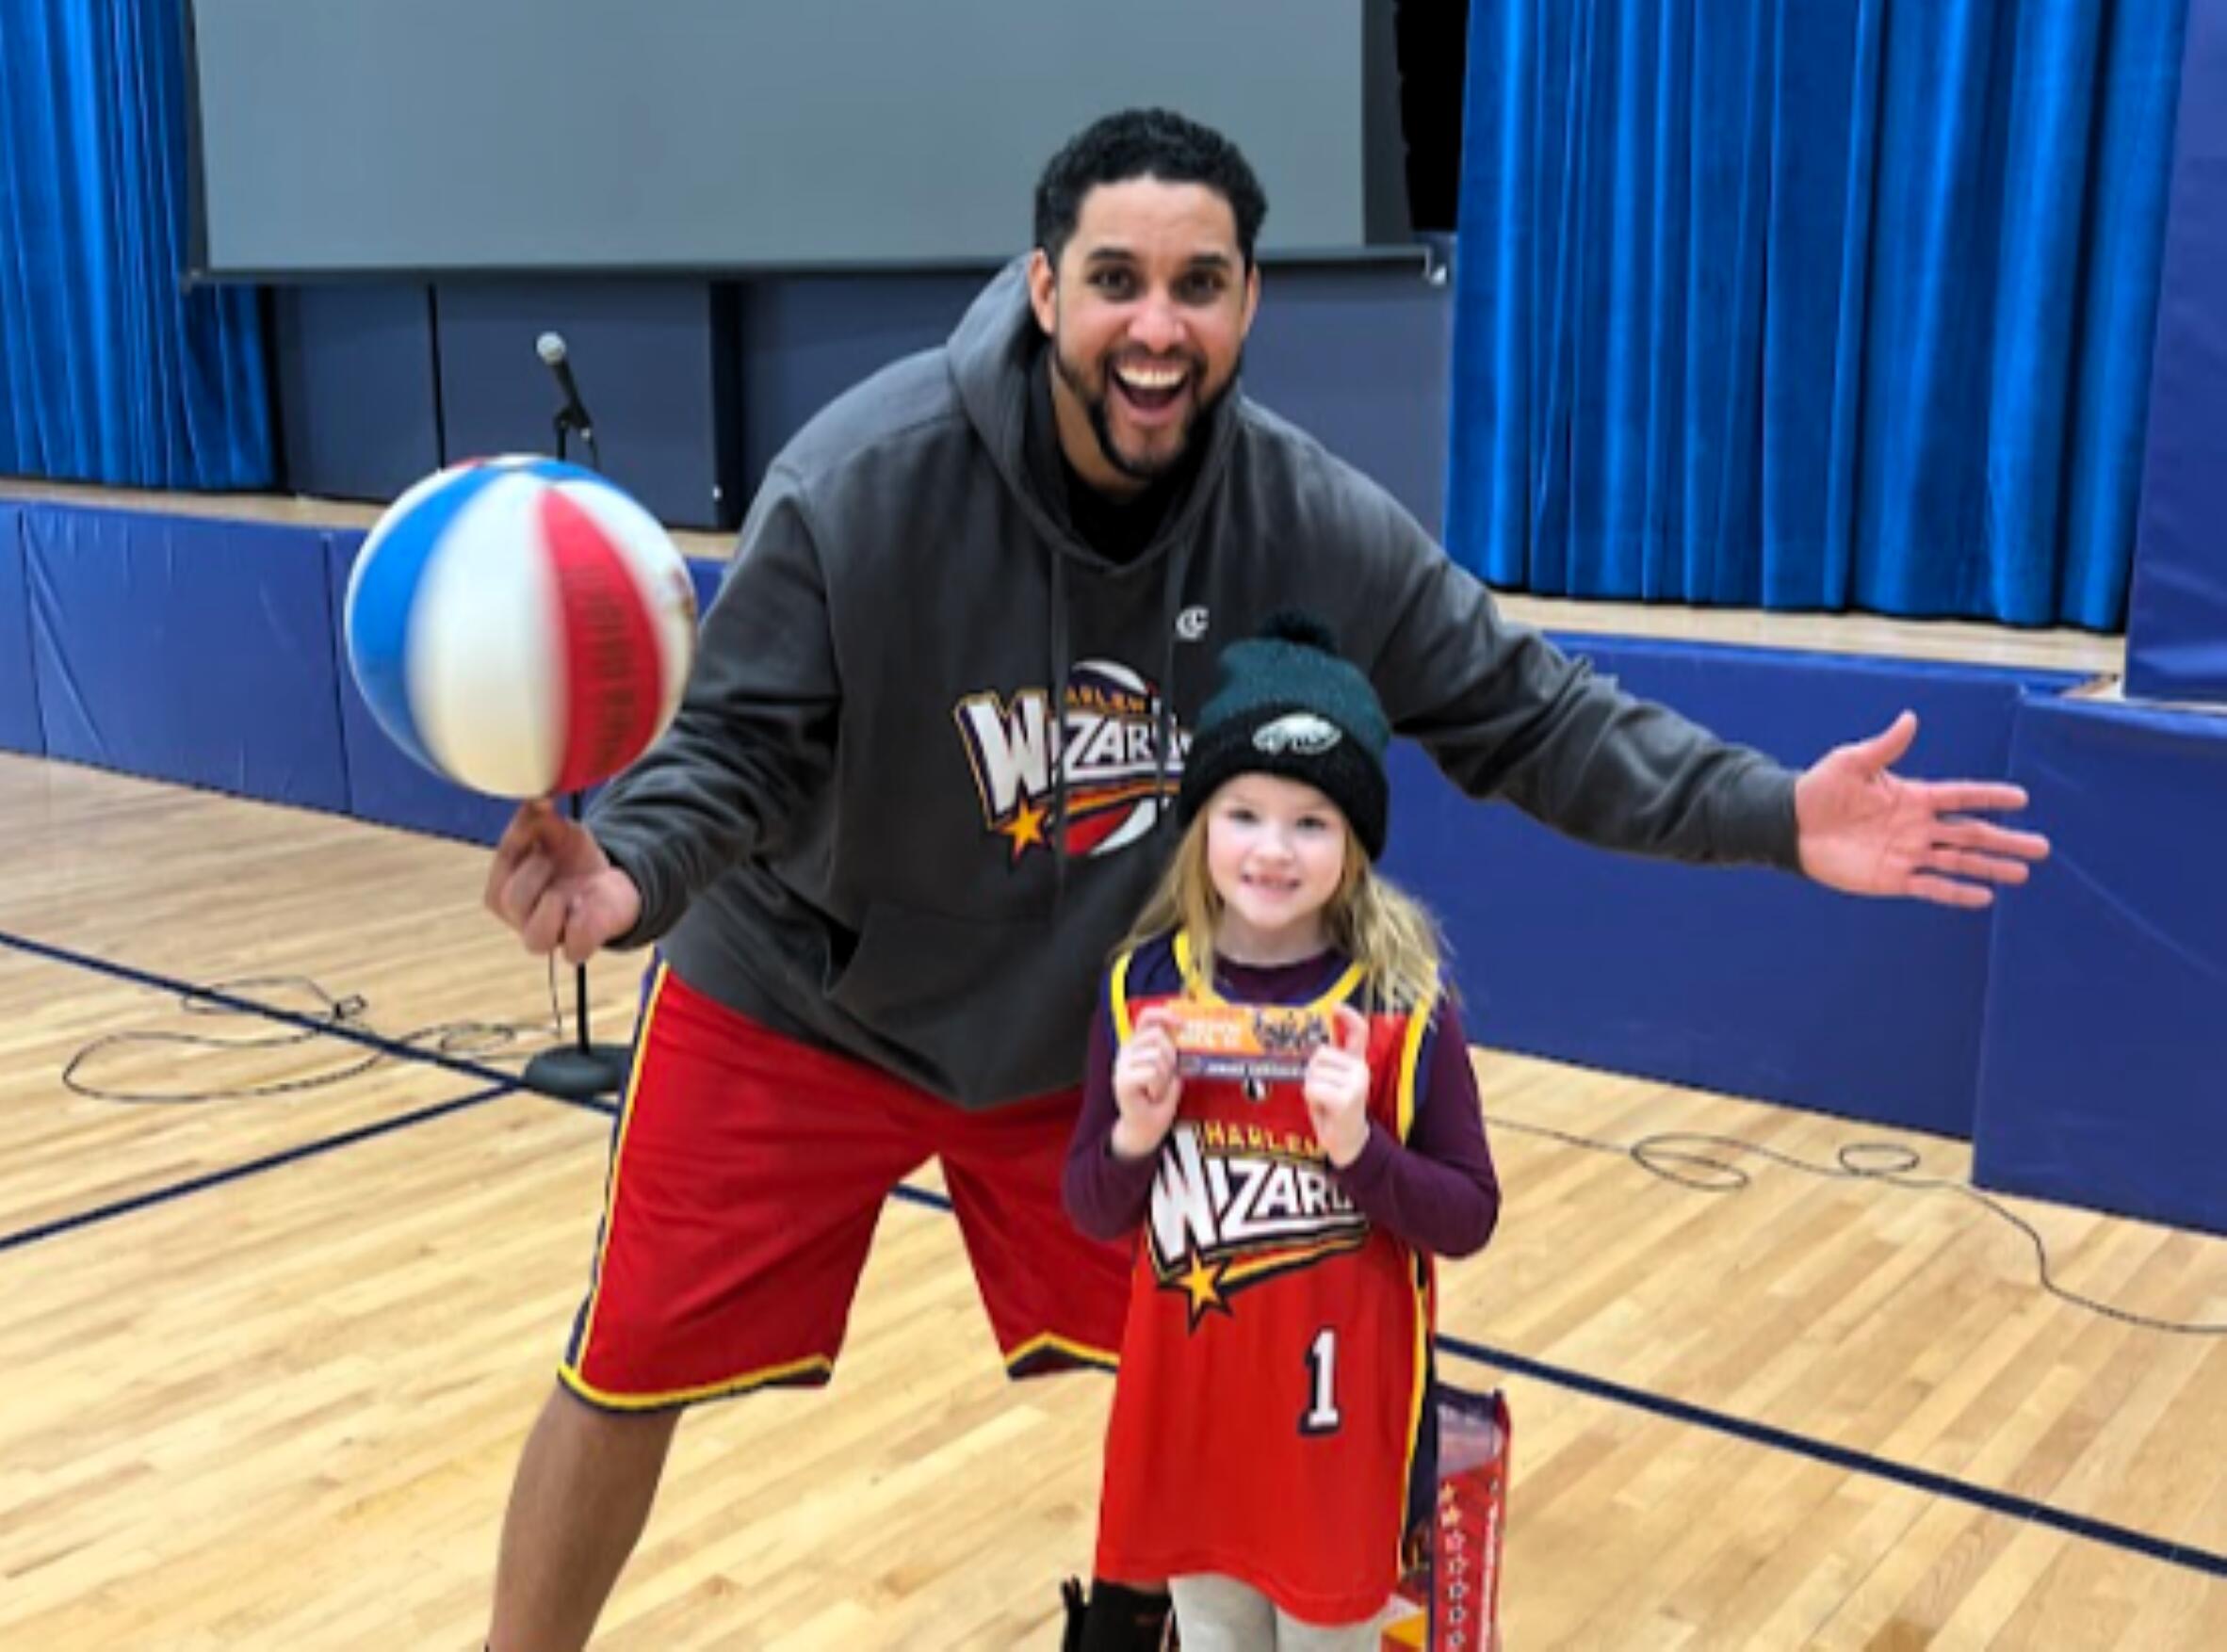 Student with a Wizards basketball player